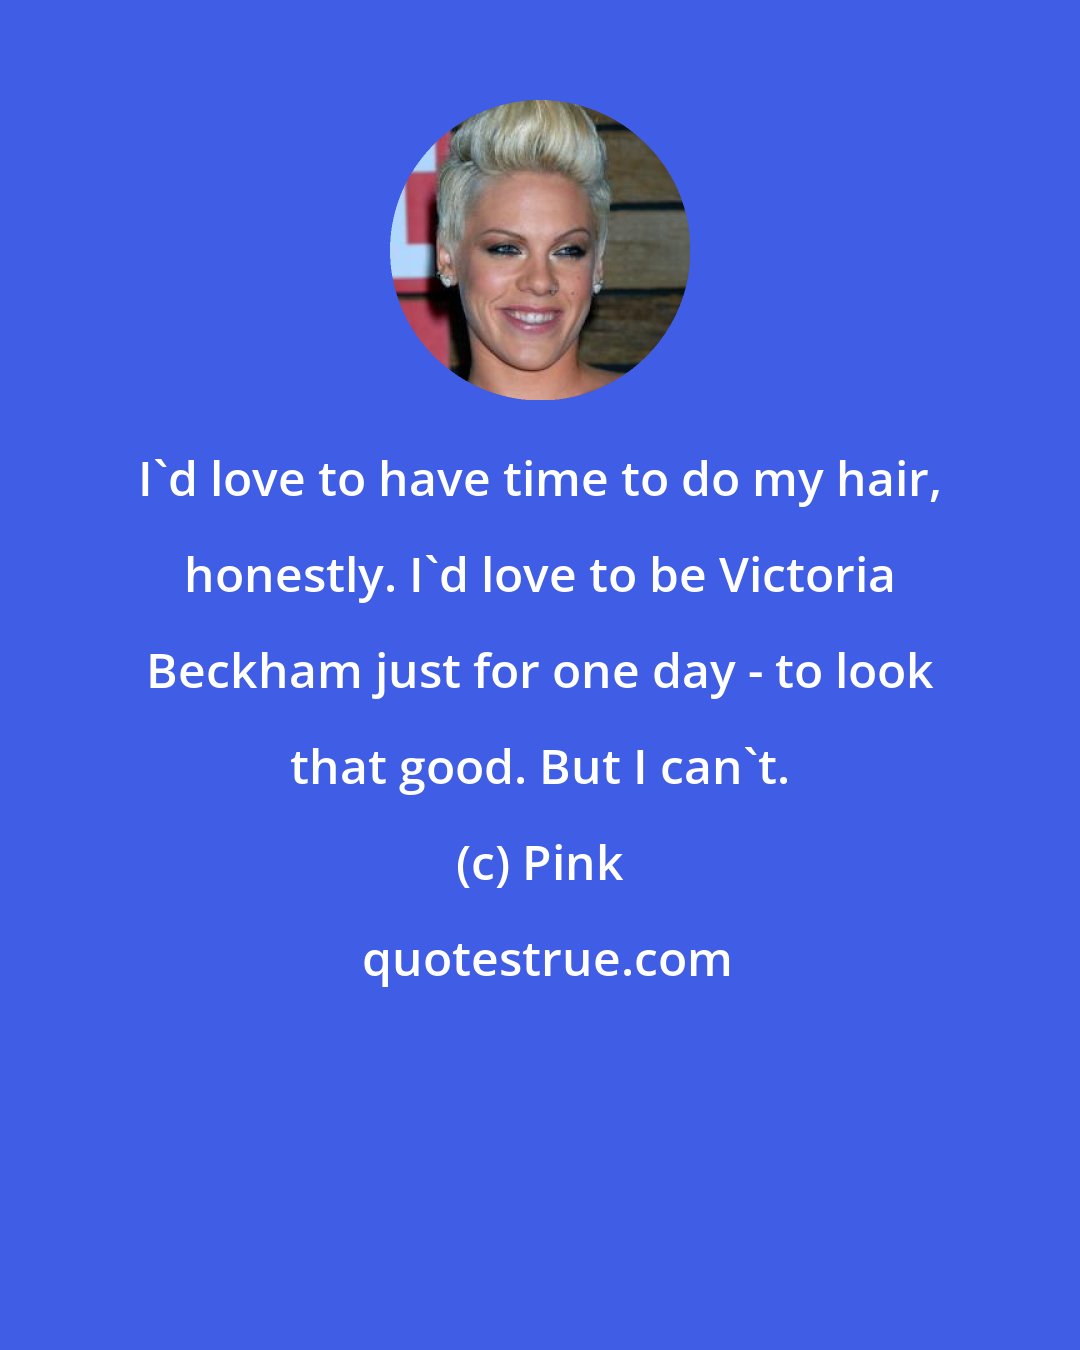 Pink: I'd love to have time to do my hair, honestly. I'd love to be Victoria Beckham just for one day - to look that good. But I can't.